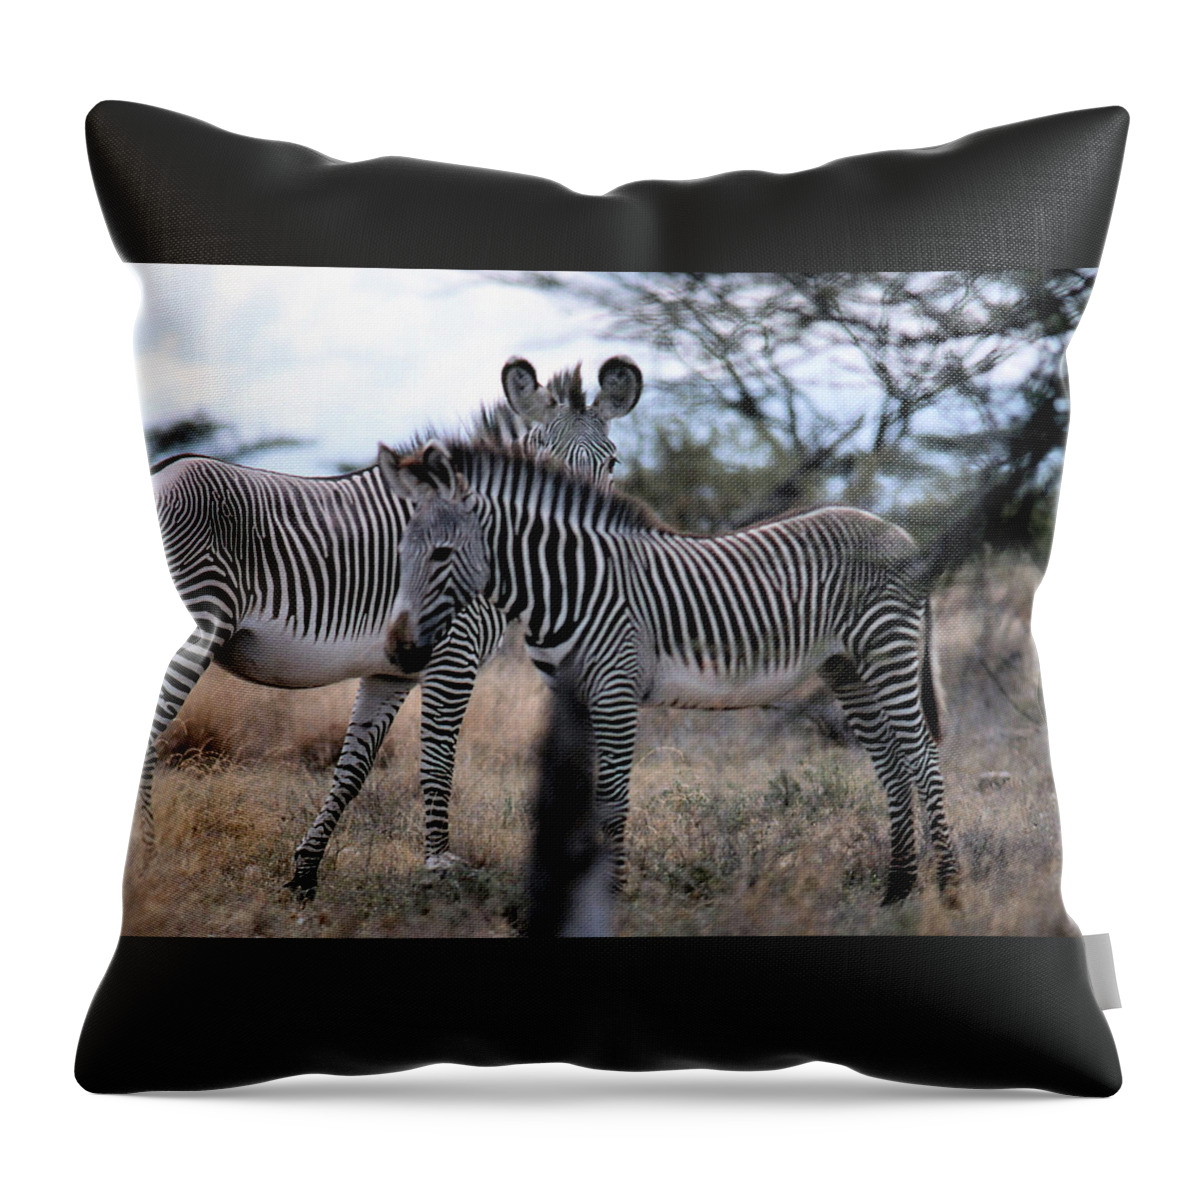 Zebra Throw Pillow featuring the photograph Two Zebras by Russ Considine